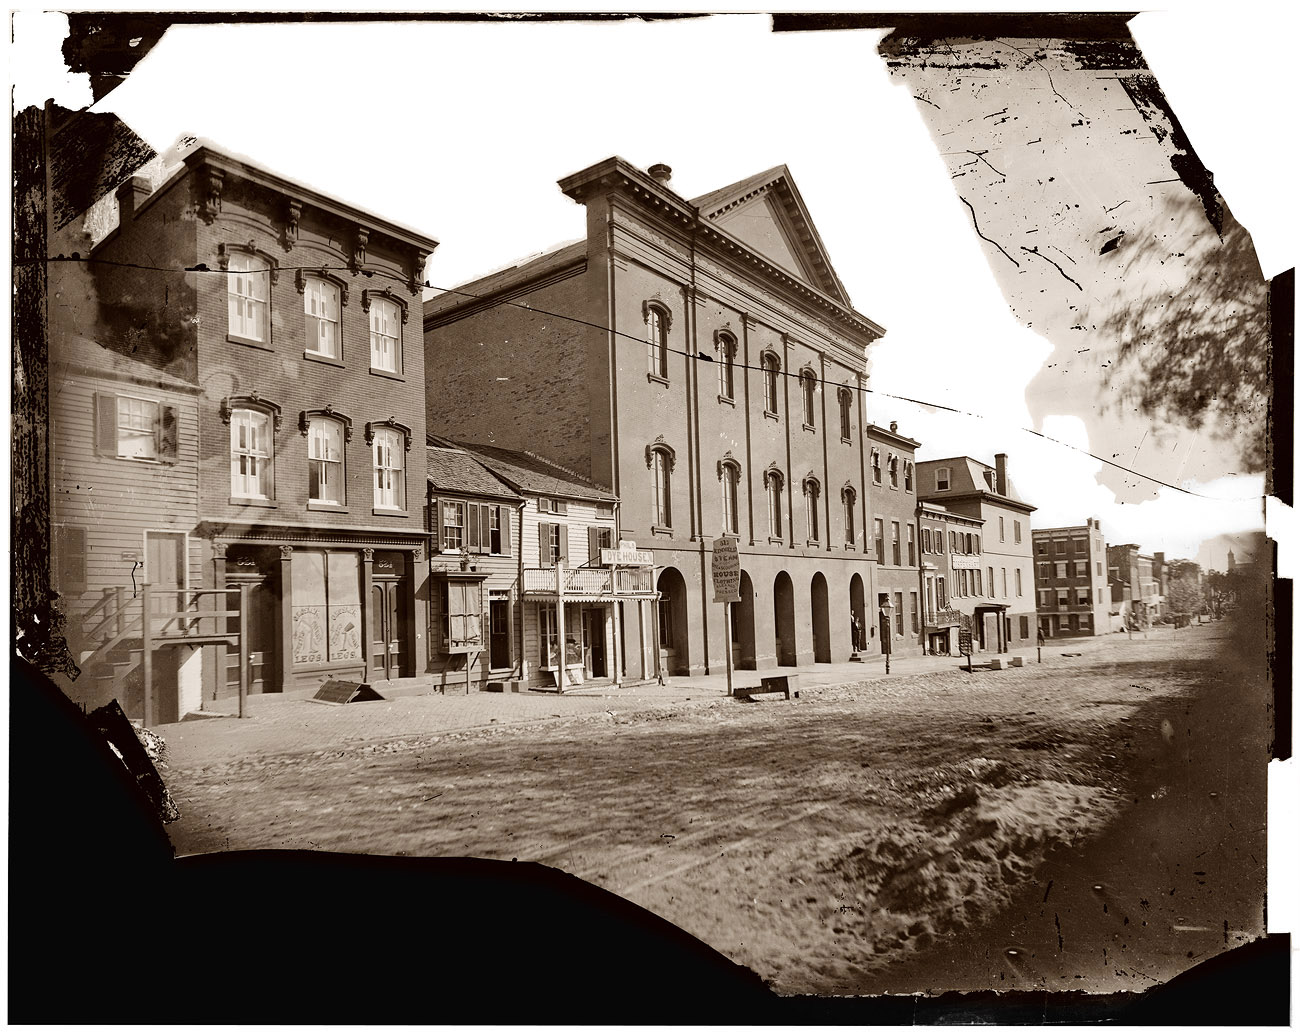 Old Ford's Theatre in Washington, D.C., where Abraham Lincoln was shot in 1865. View full size. Wet collodion glass plate. Photograph by Mathew Brady.